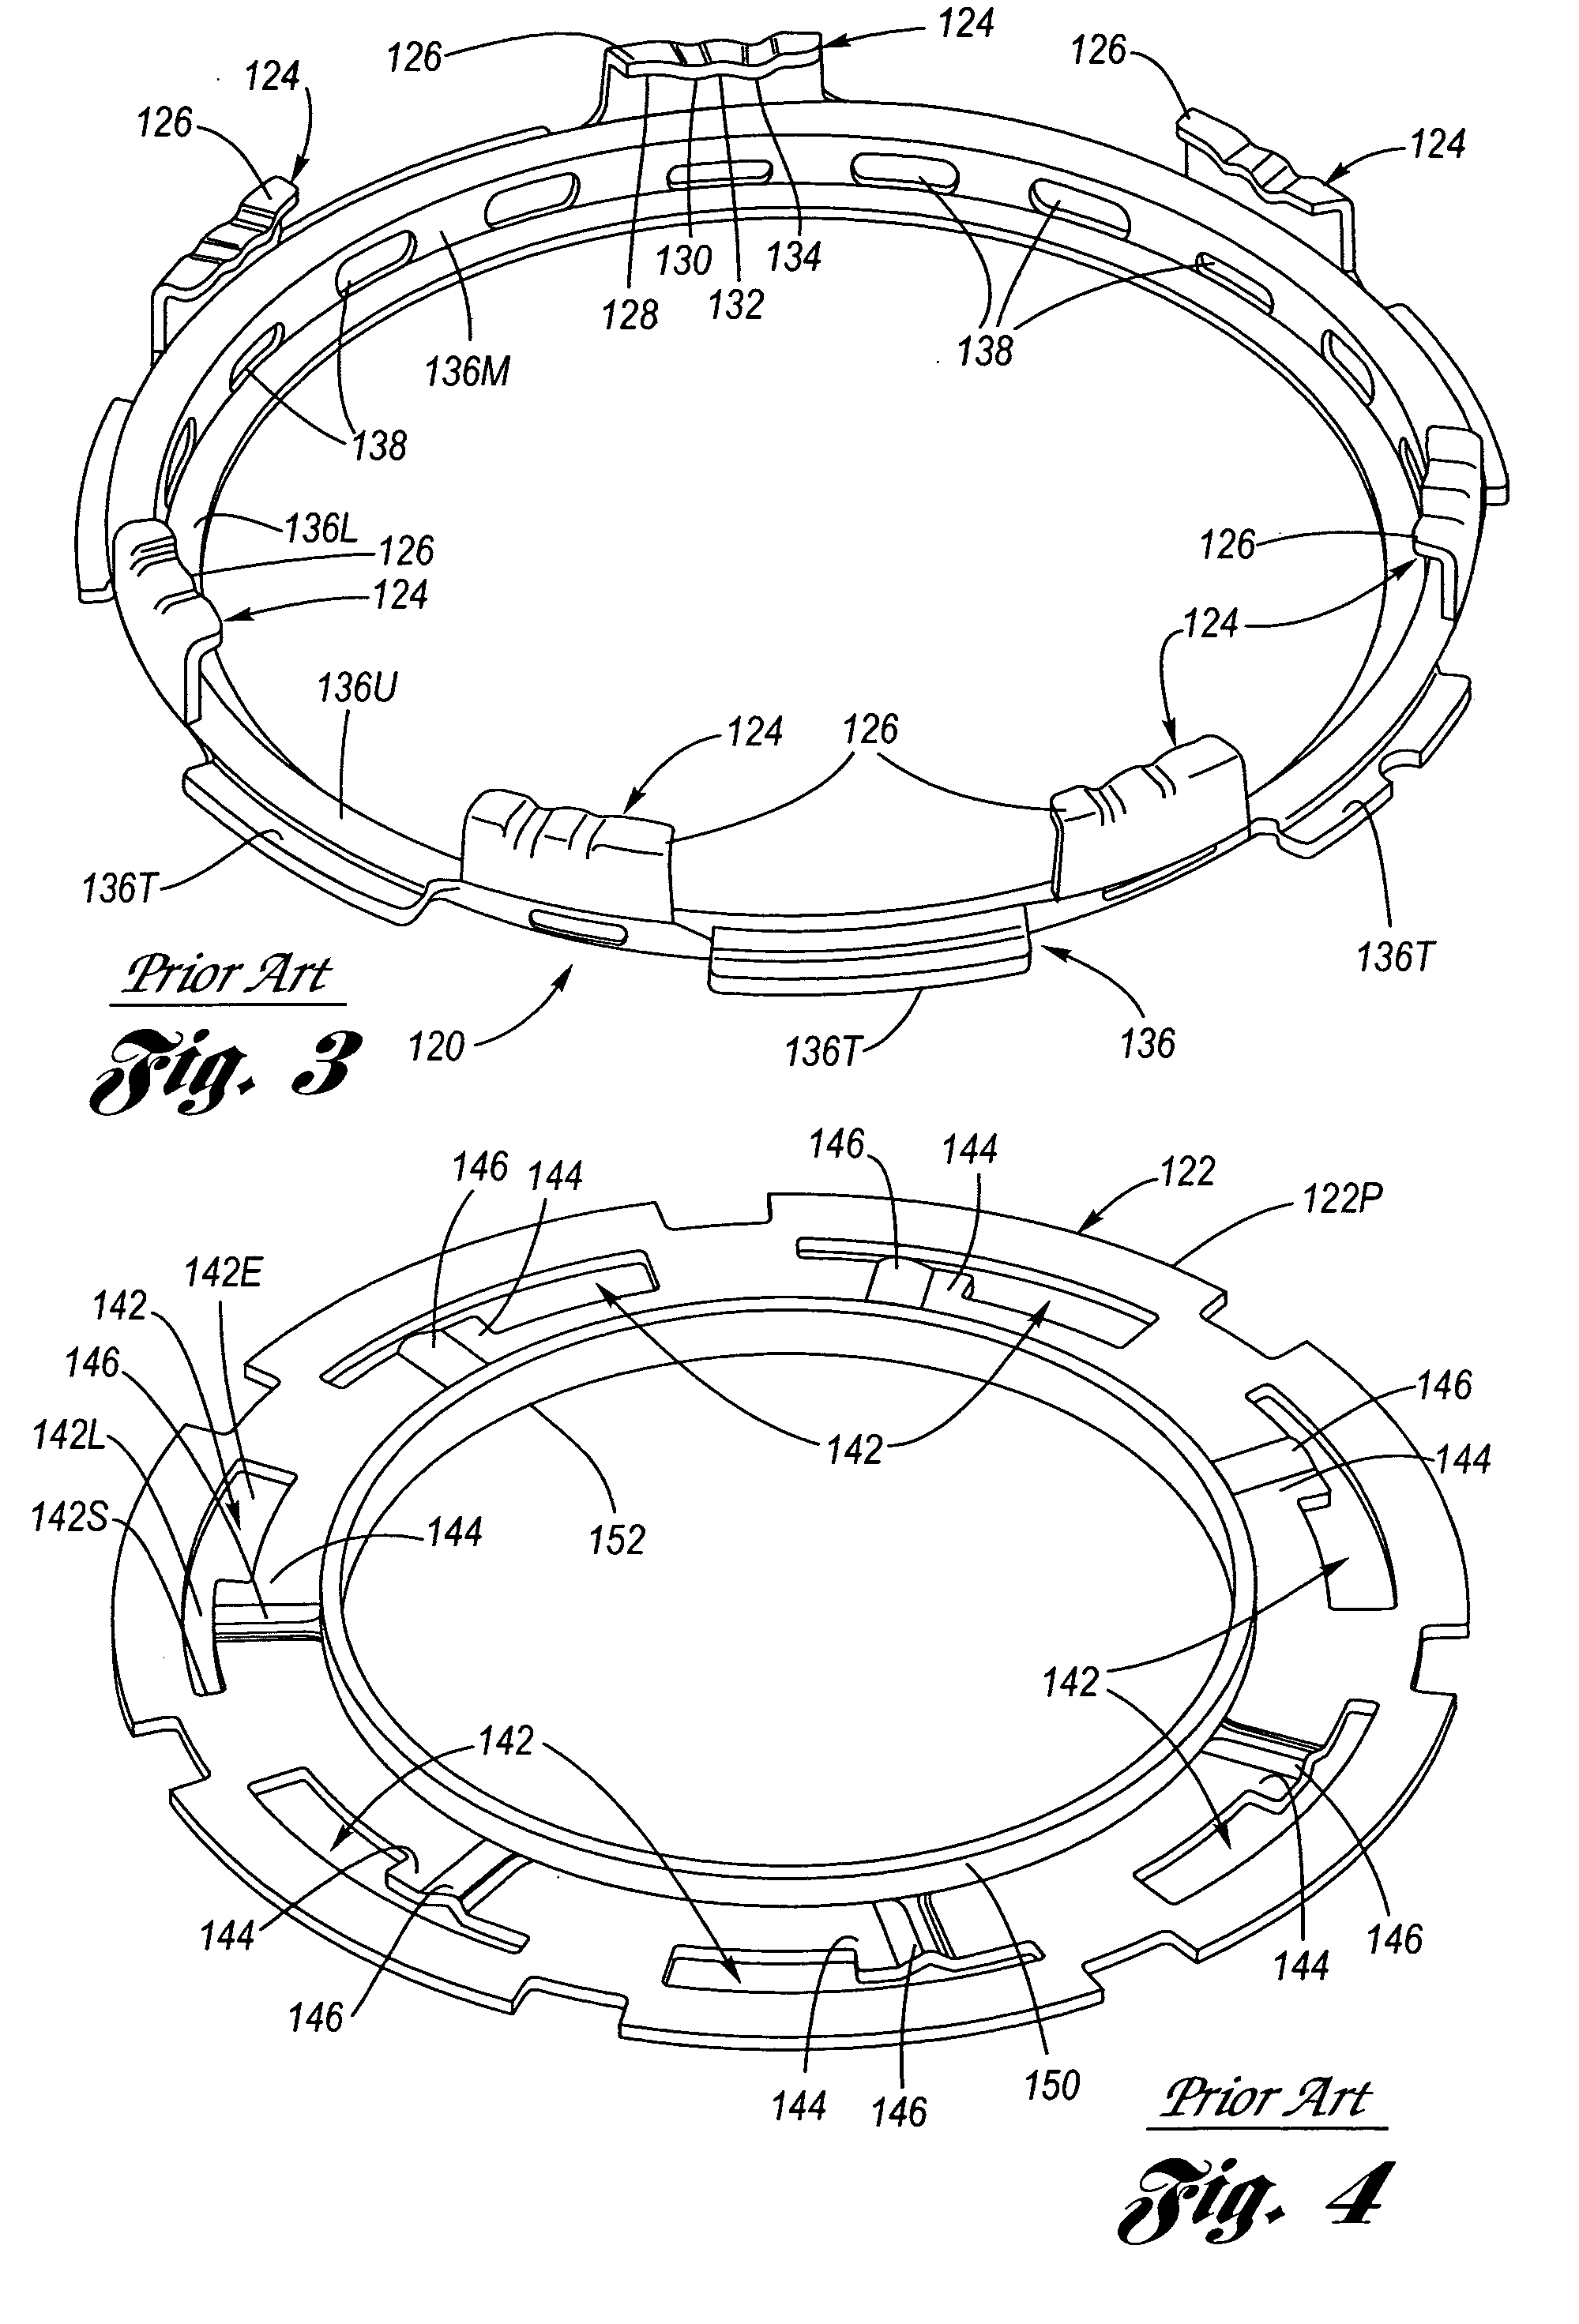 Helmeted lock ring for a sender module closure system for a fuel tank